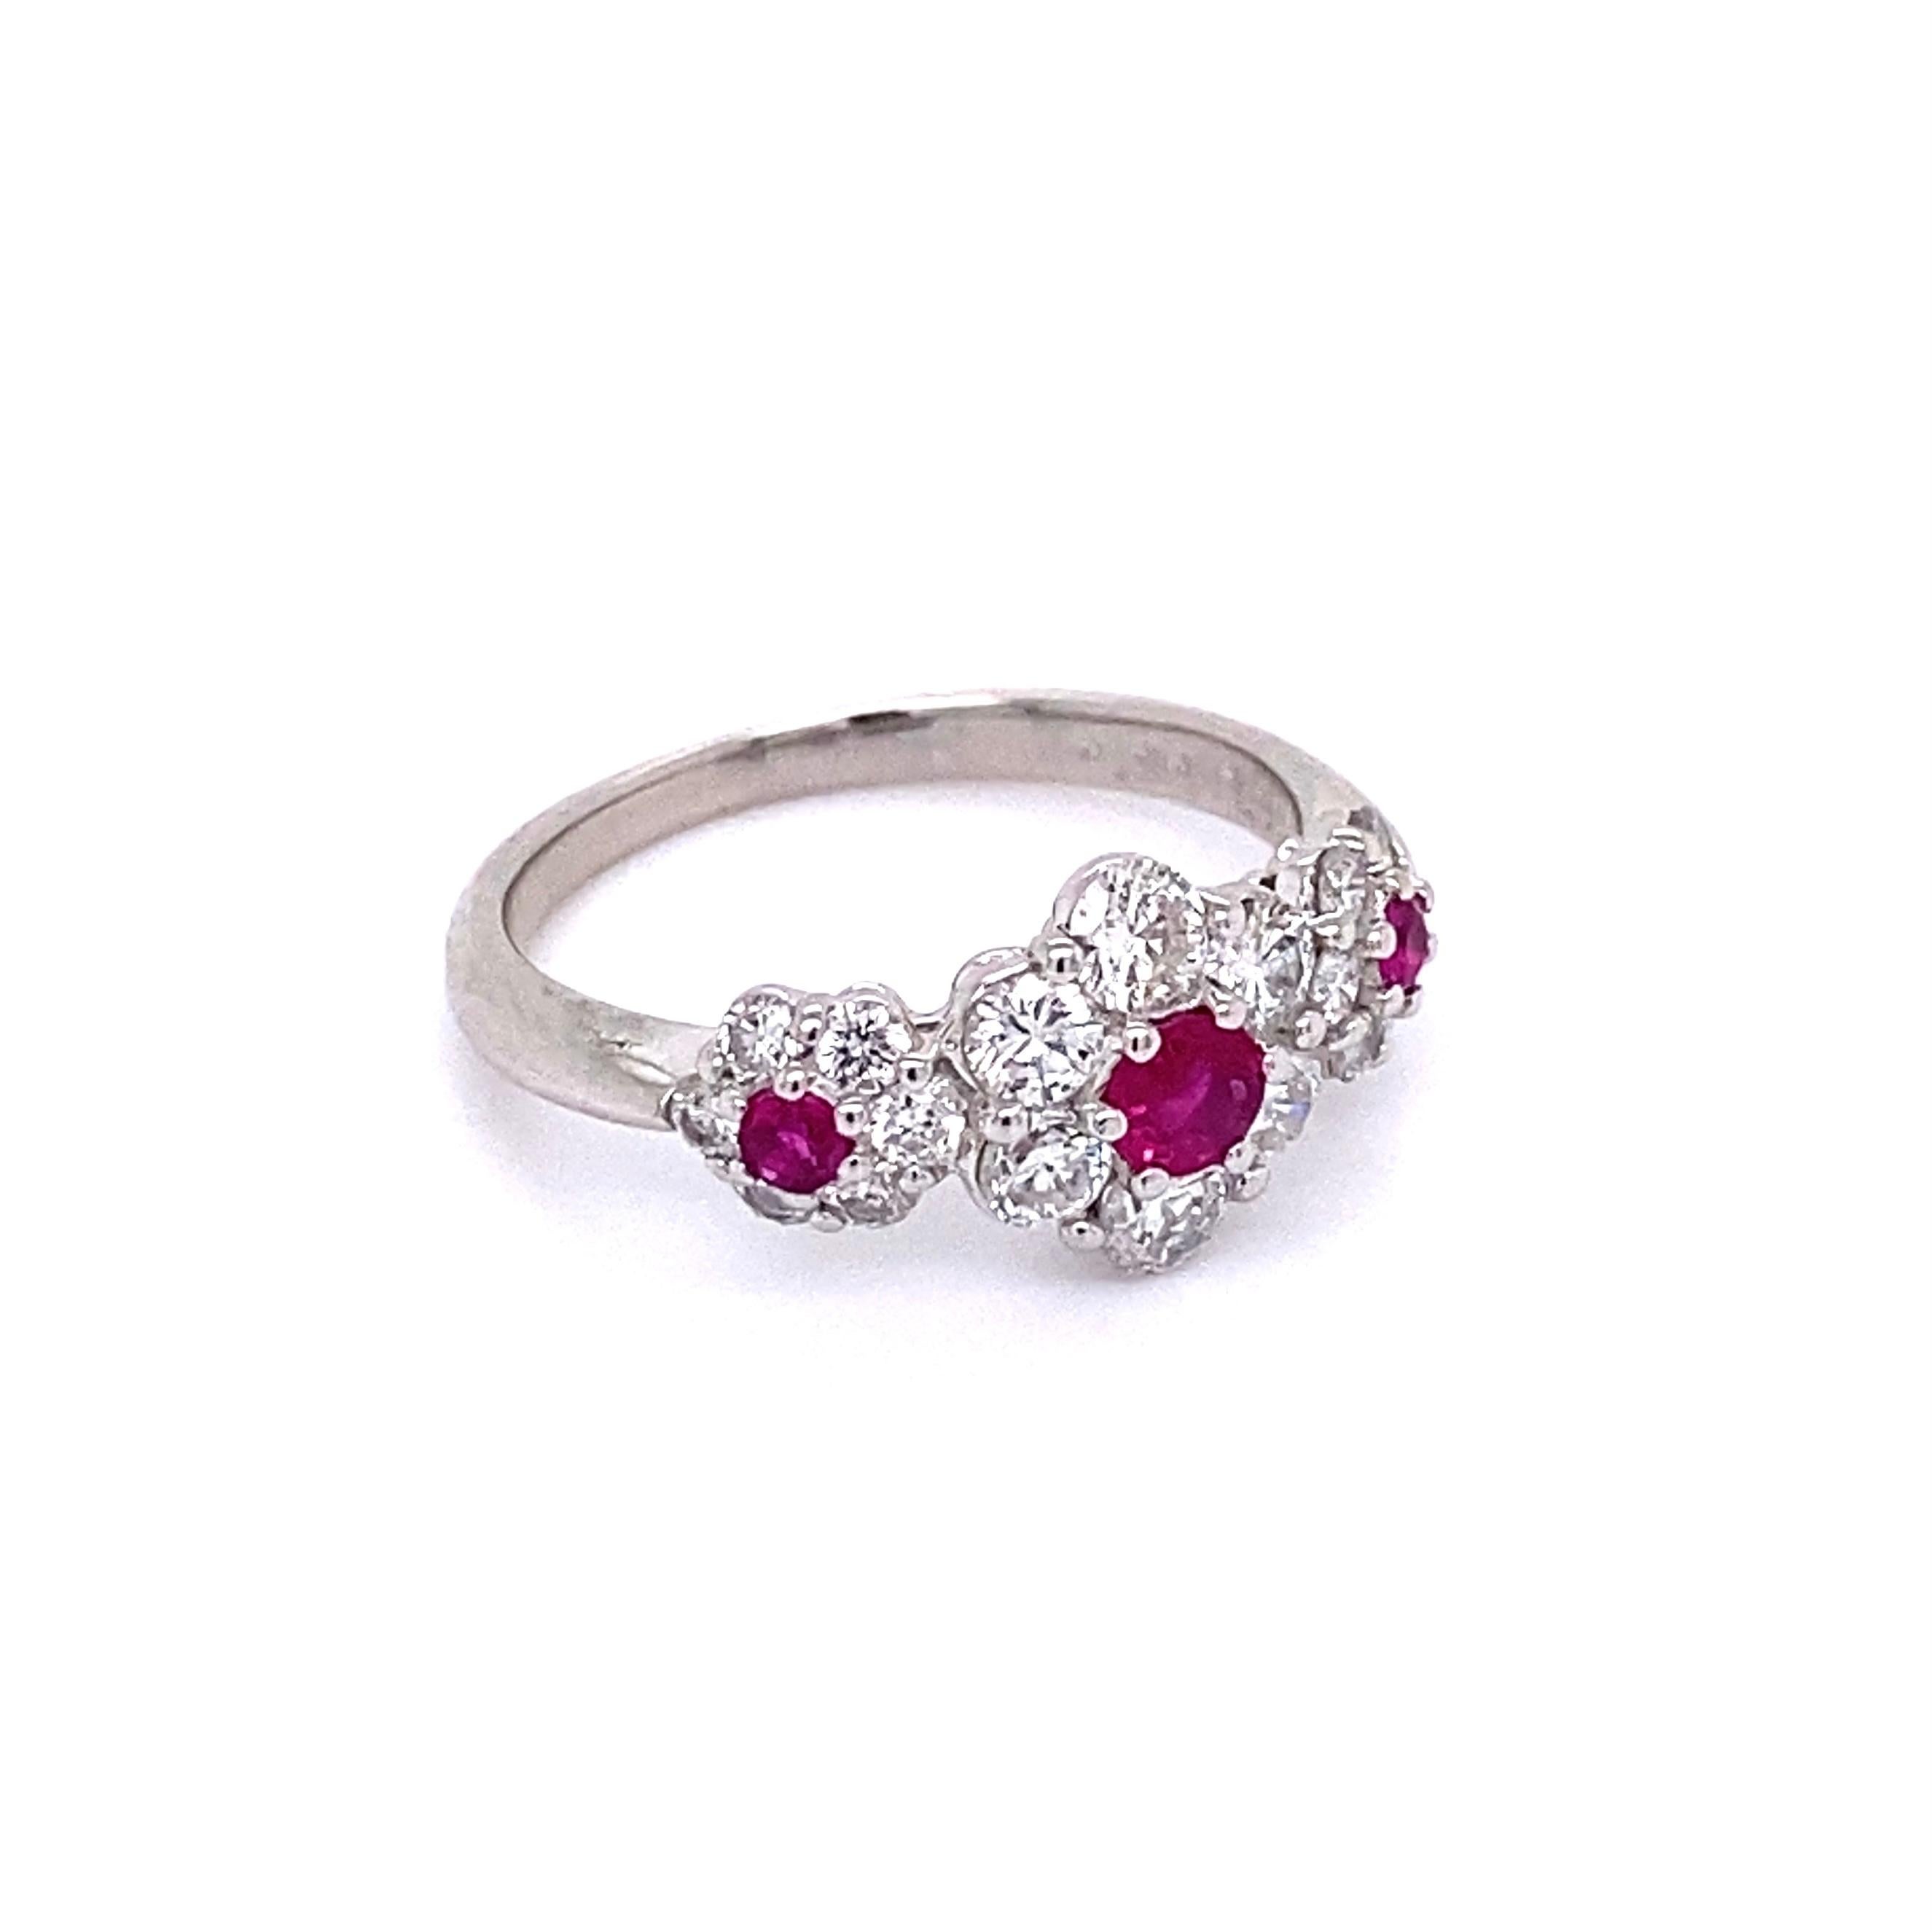 Simply Beautiful! Finely detailed 3-Stone Band Ring. Securely set with perfectly 3 matched Natural Rubies approx. 0.31 total carat weight, surrounded by Diamonds, approx. 0.84tcw. Ring size 5.75, we offer ring resizing. Hand crafted Platinum